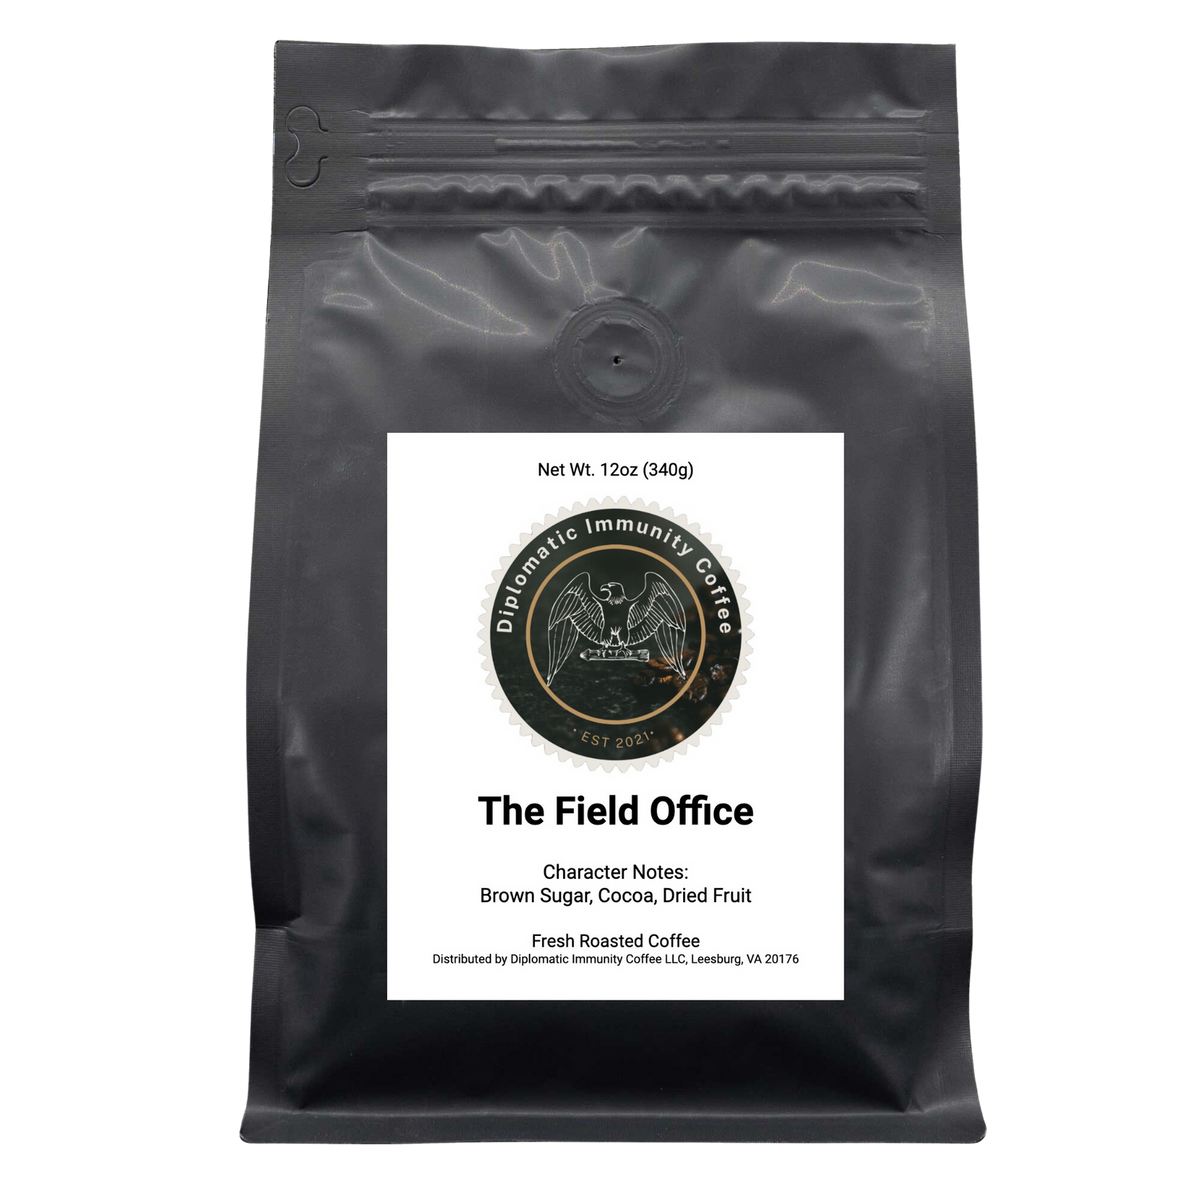 THE FIELD OFFICE - Medium Dark Roast - Country: Guatemala & Ethiopia Blend - Flavor Notes: Brown Sugar, Cocoa, Dried Fruit